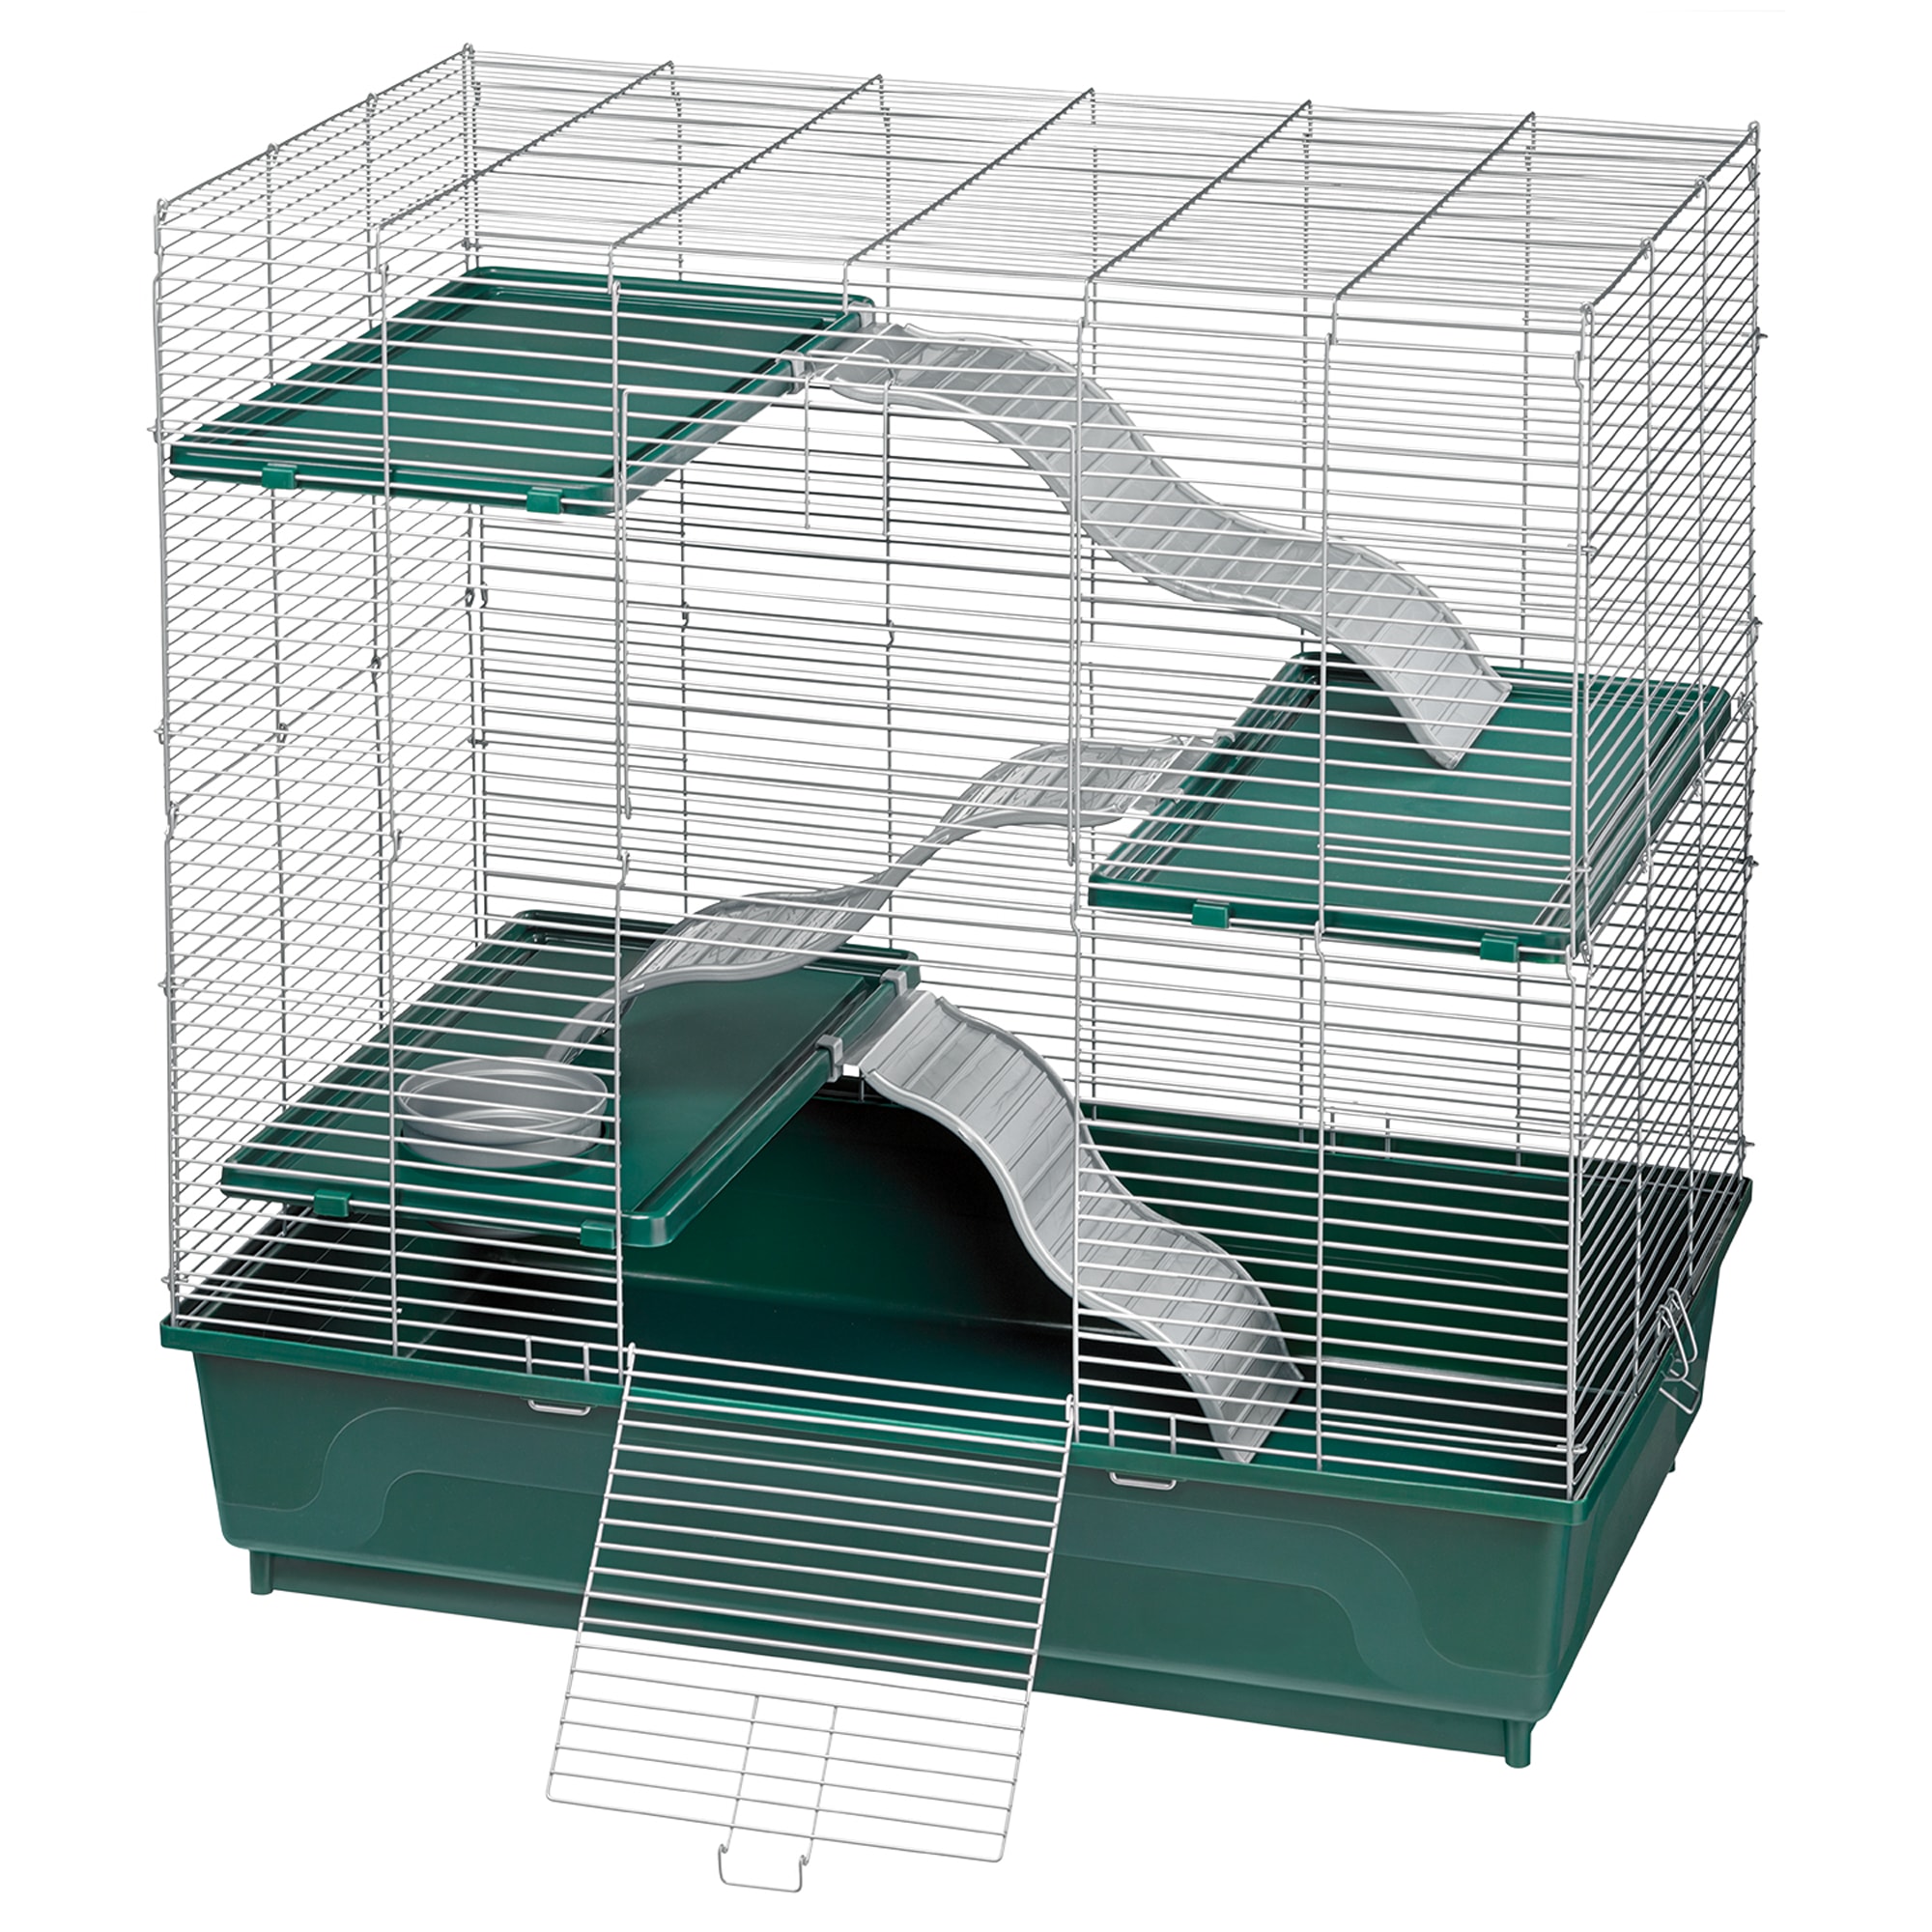 What cages are best for Rats? 